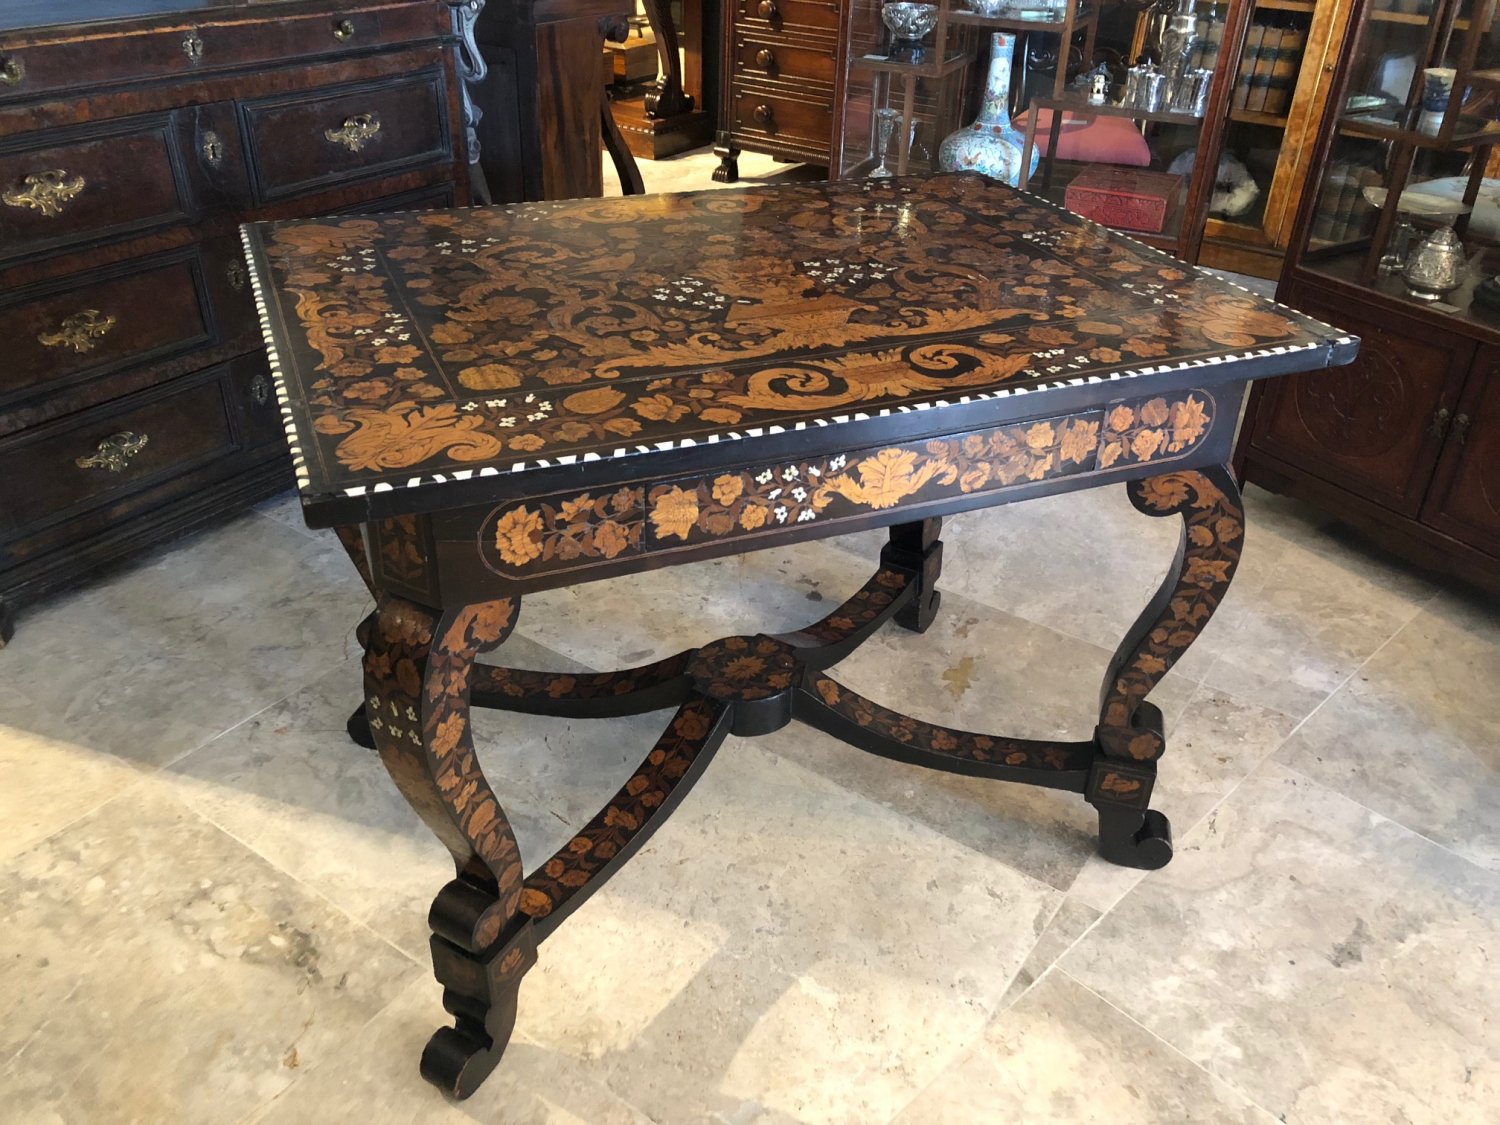 18th Century Dutch Marquetry Table